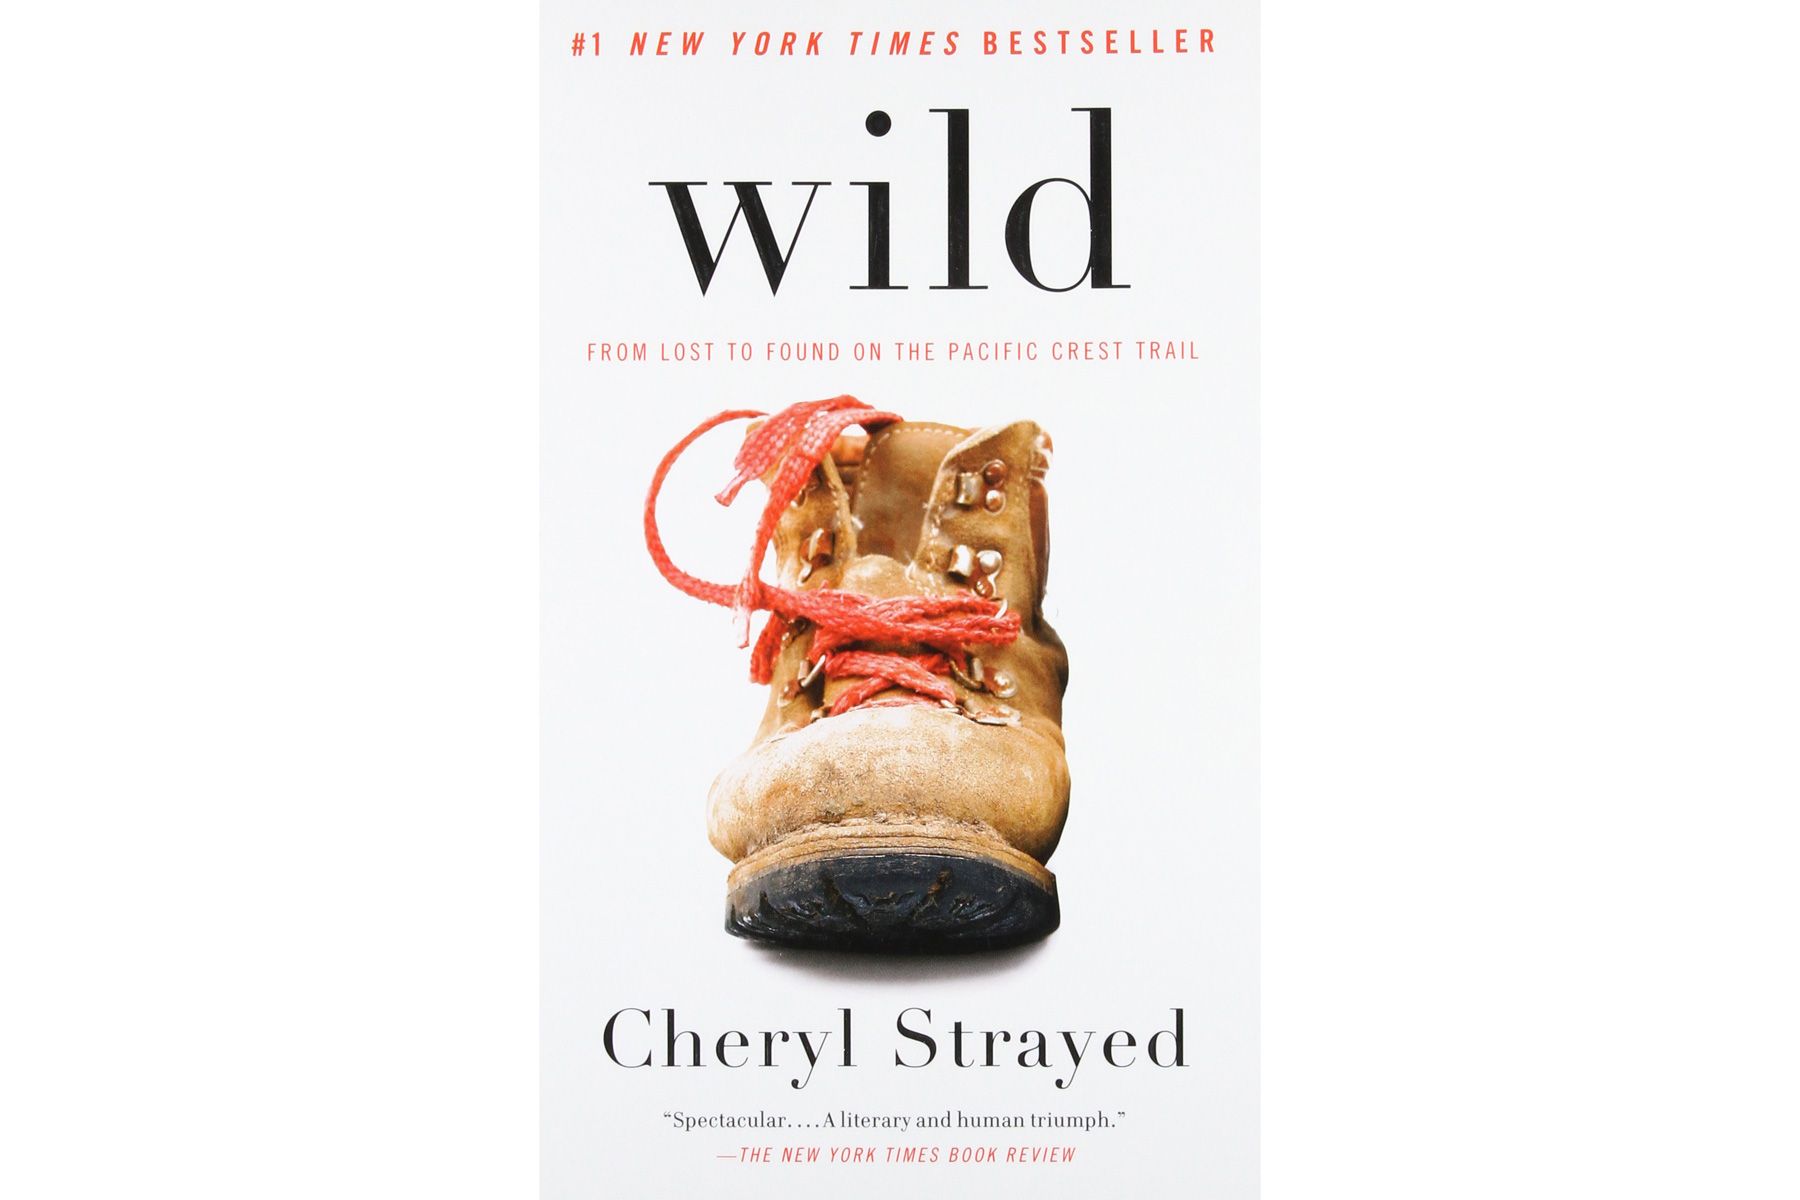 Wild: From Lost to Found on the Pacific Crest Trail, автор: Cheryl Strayed